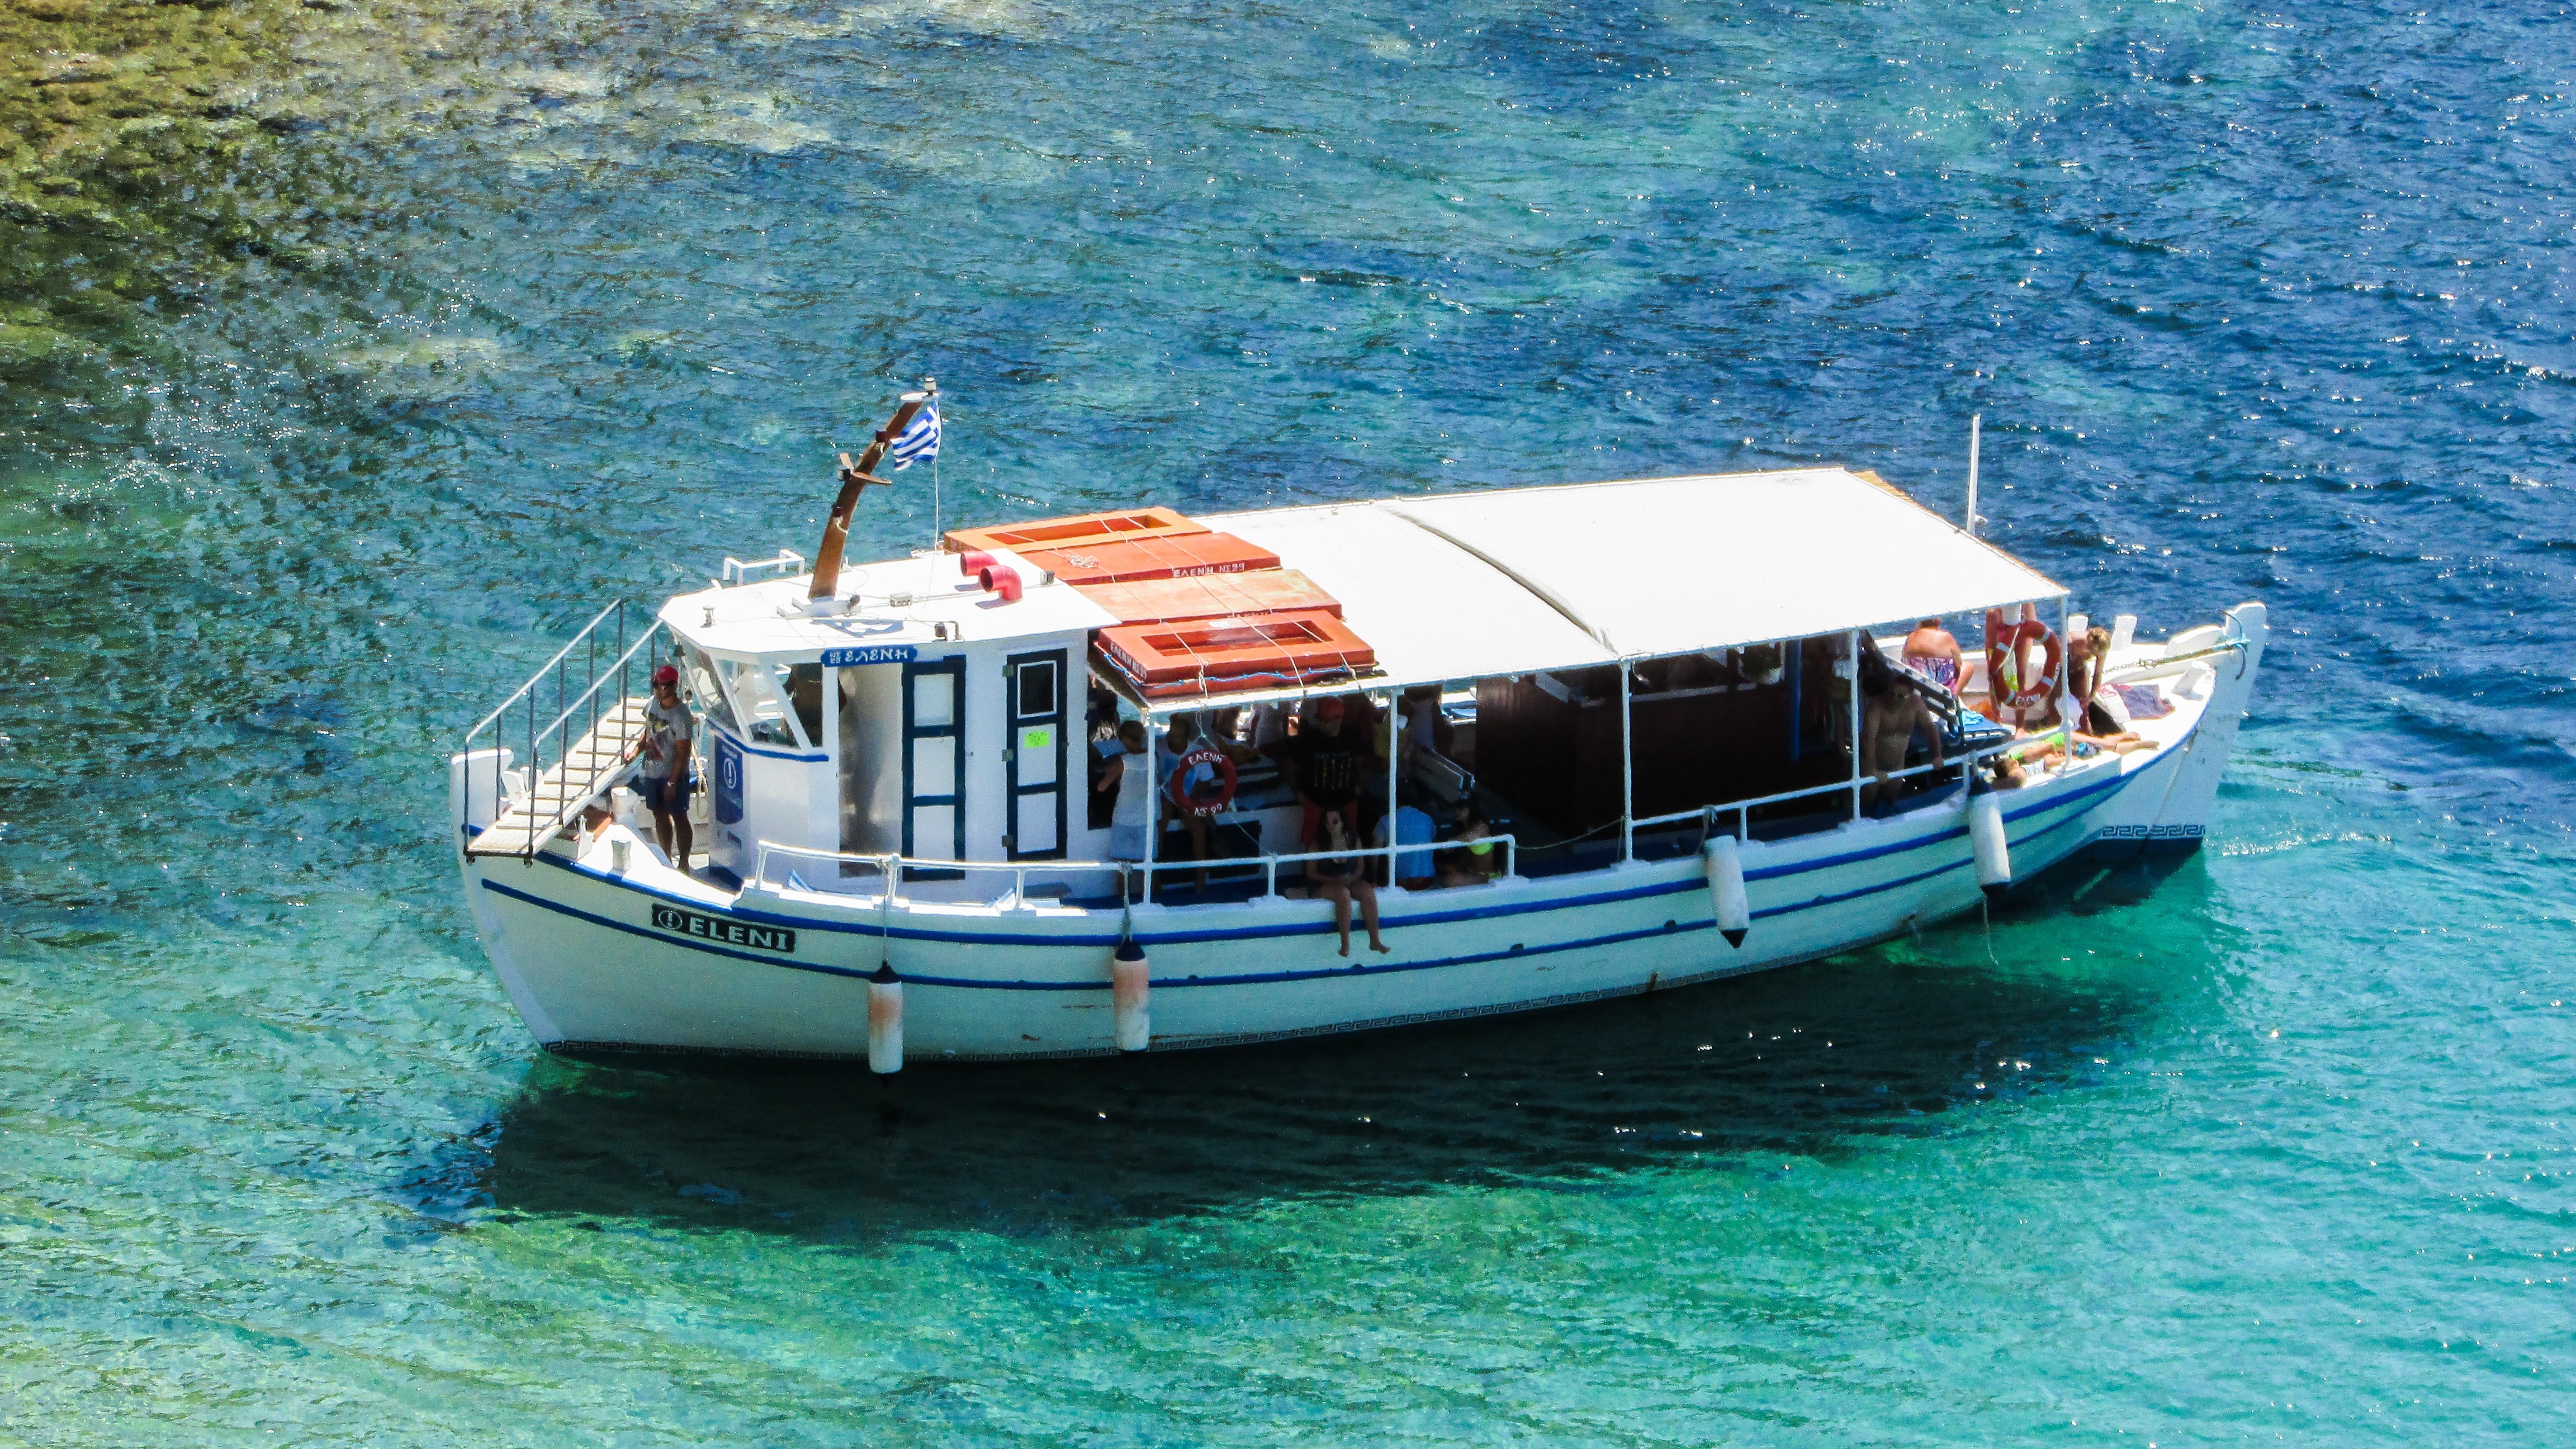 white and blue ferry boat on blue and green body of water during daytime